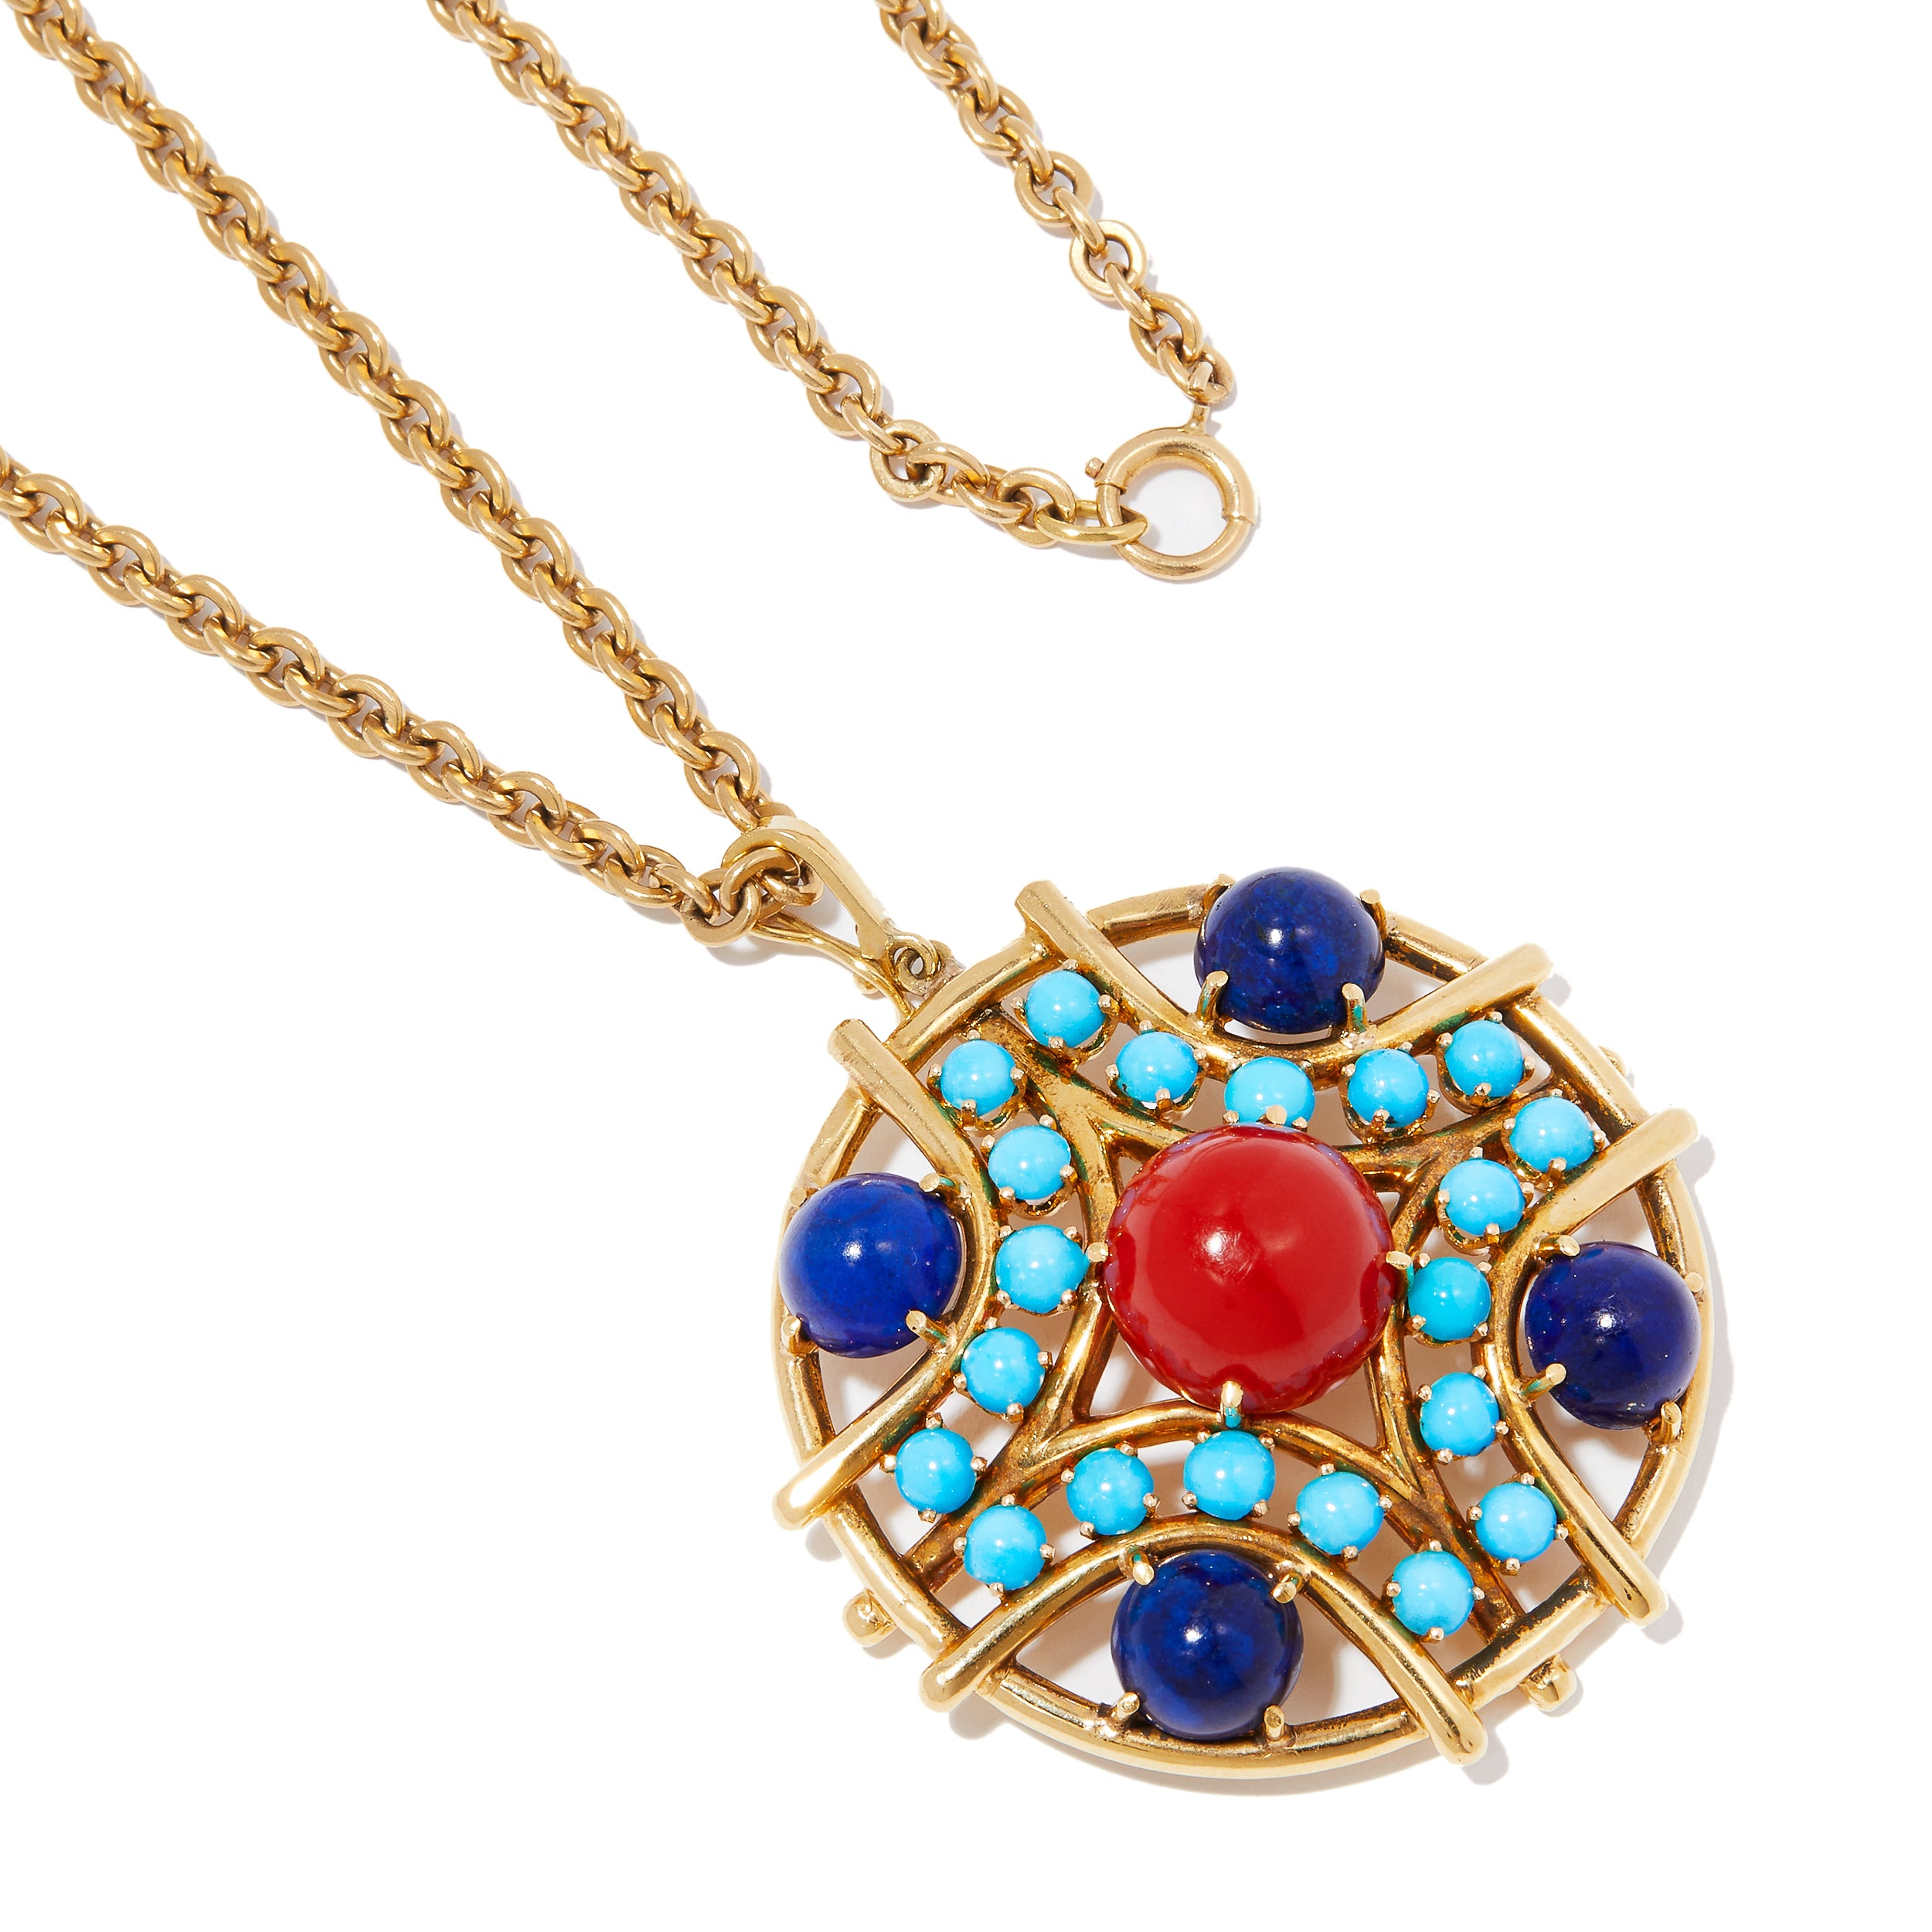 Vintage Saks Fifth Avenue gold medallion necklace with coral, turquoise, and lapis lazuli stones. 